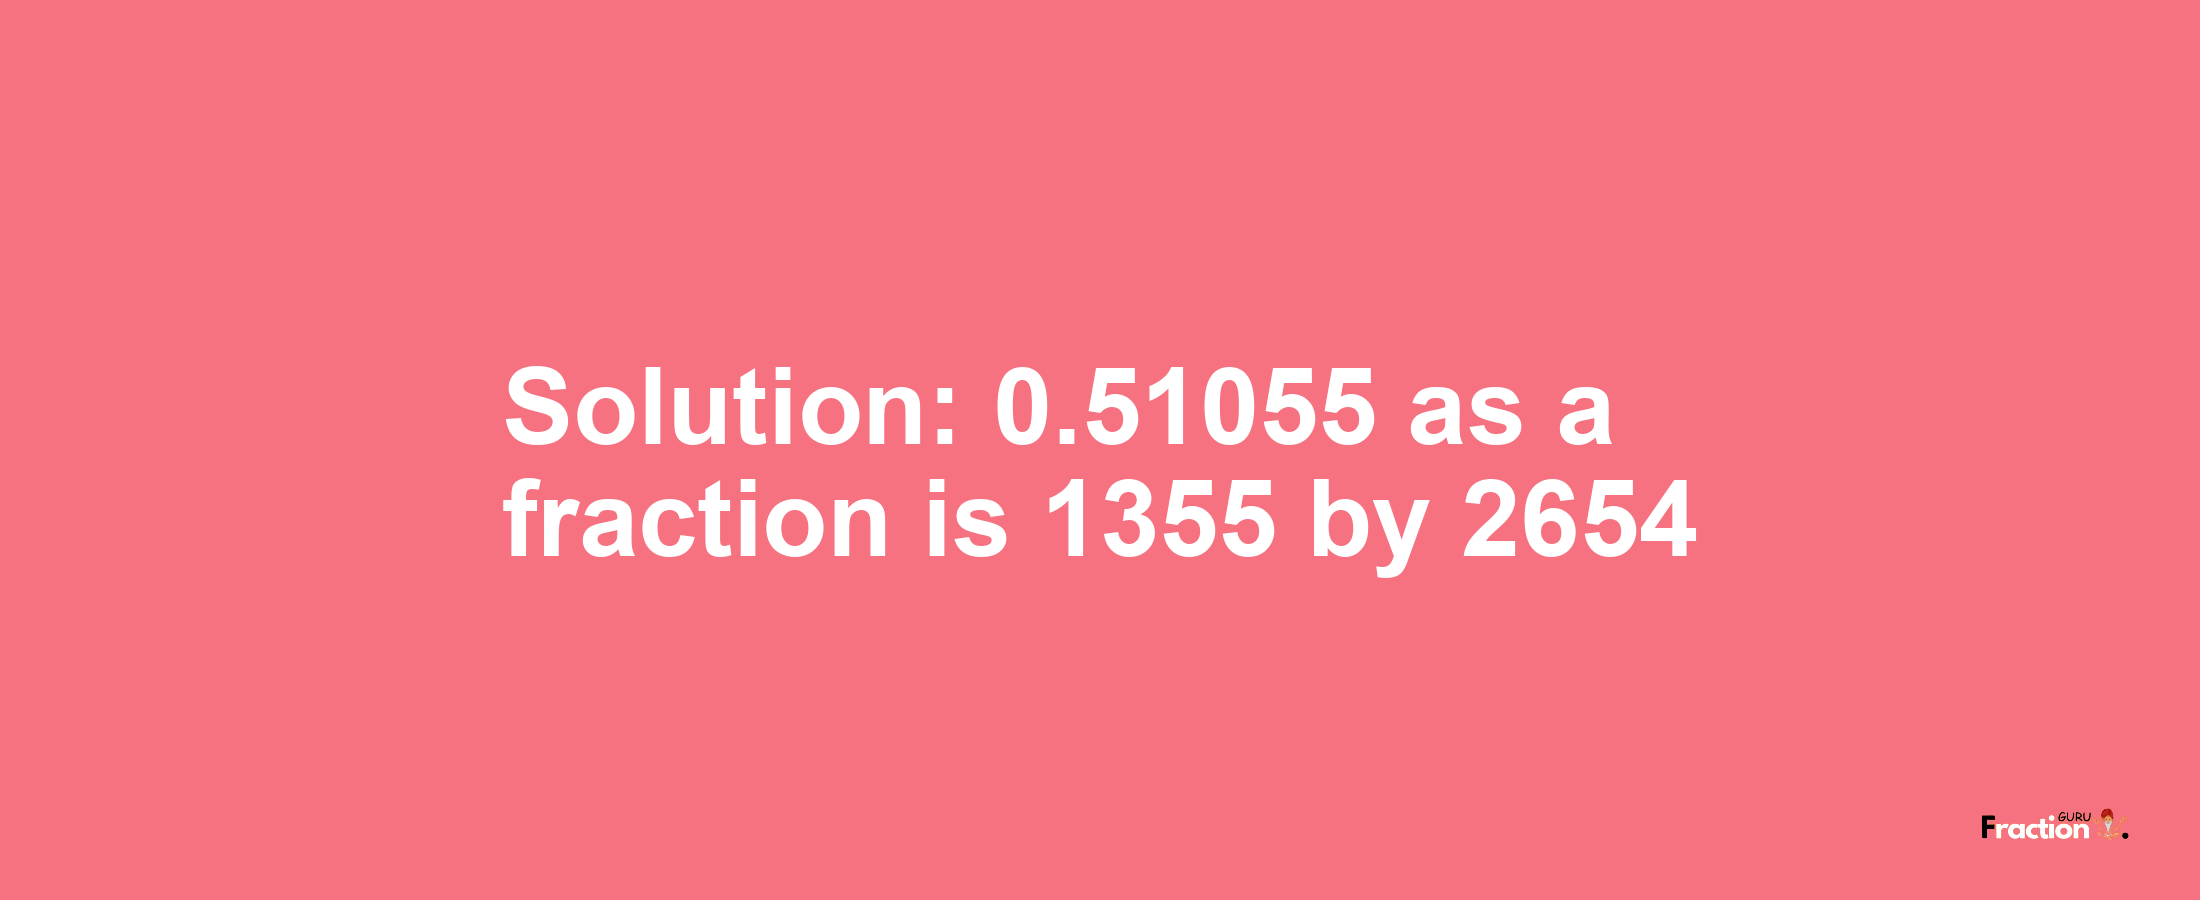 Solution:0.51055 as a fraction is 1355/2654